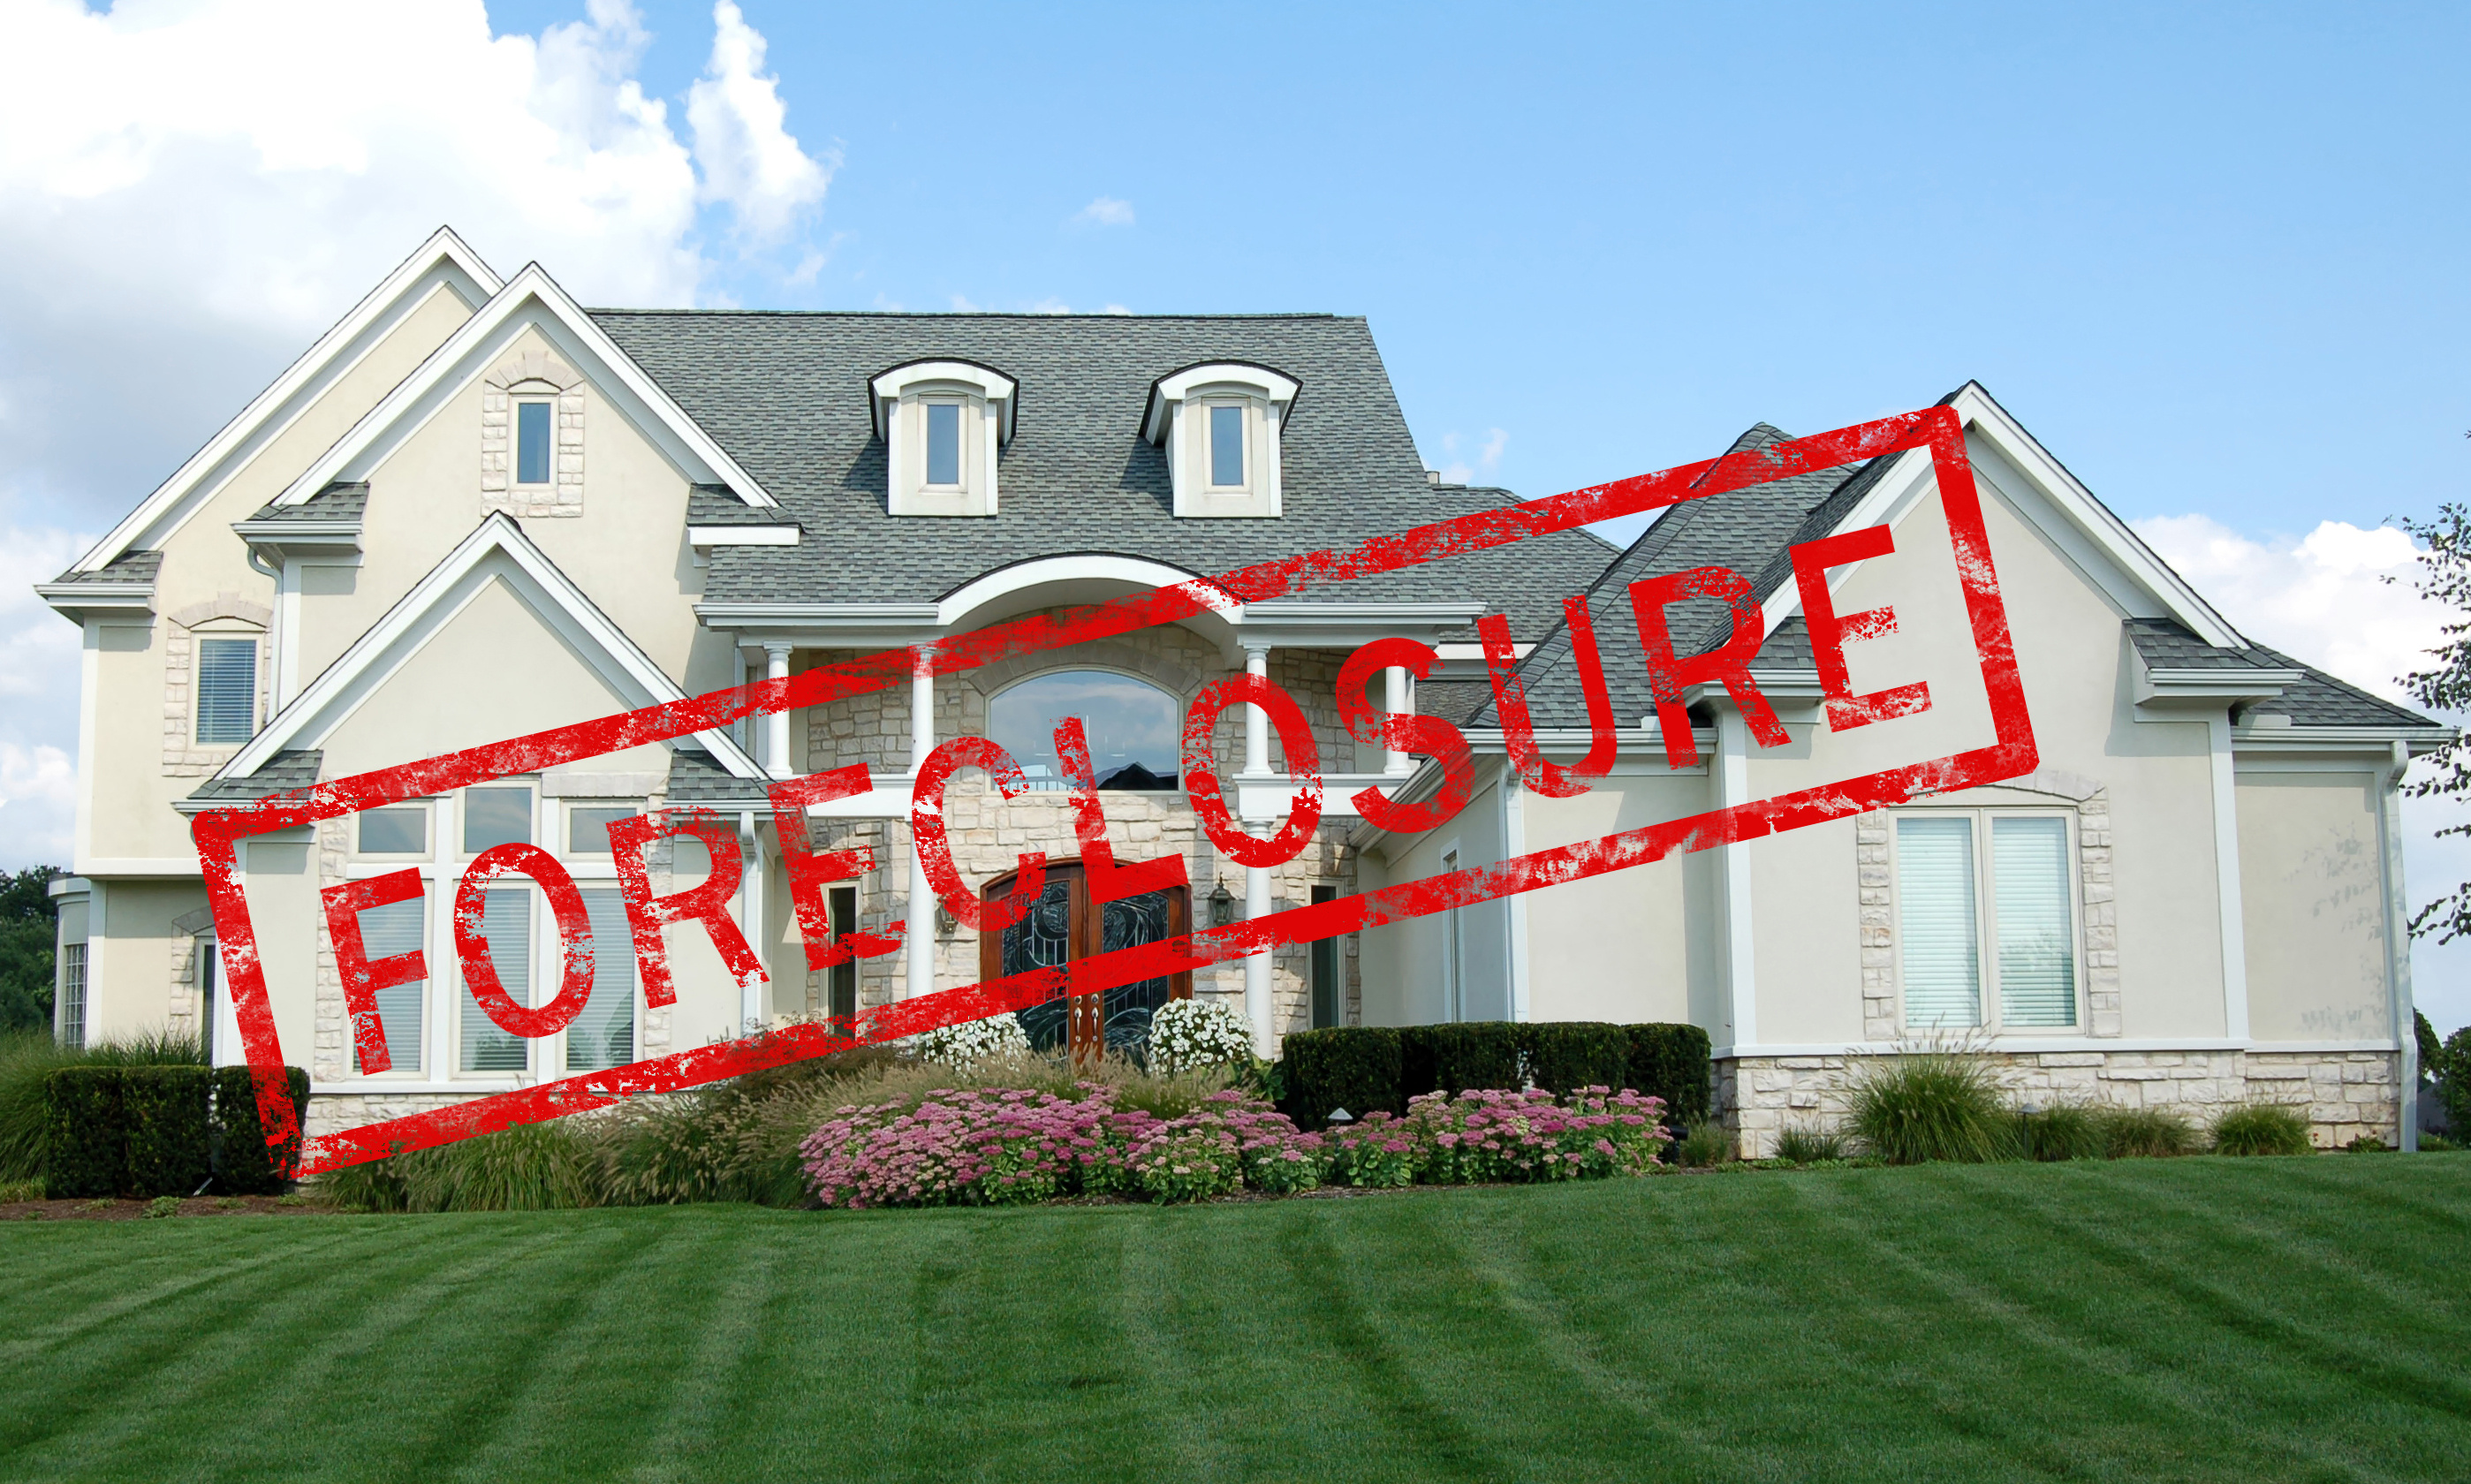 Call Deal Appraisal Services when you need valuations for Armstrong foreclosures